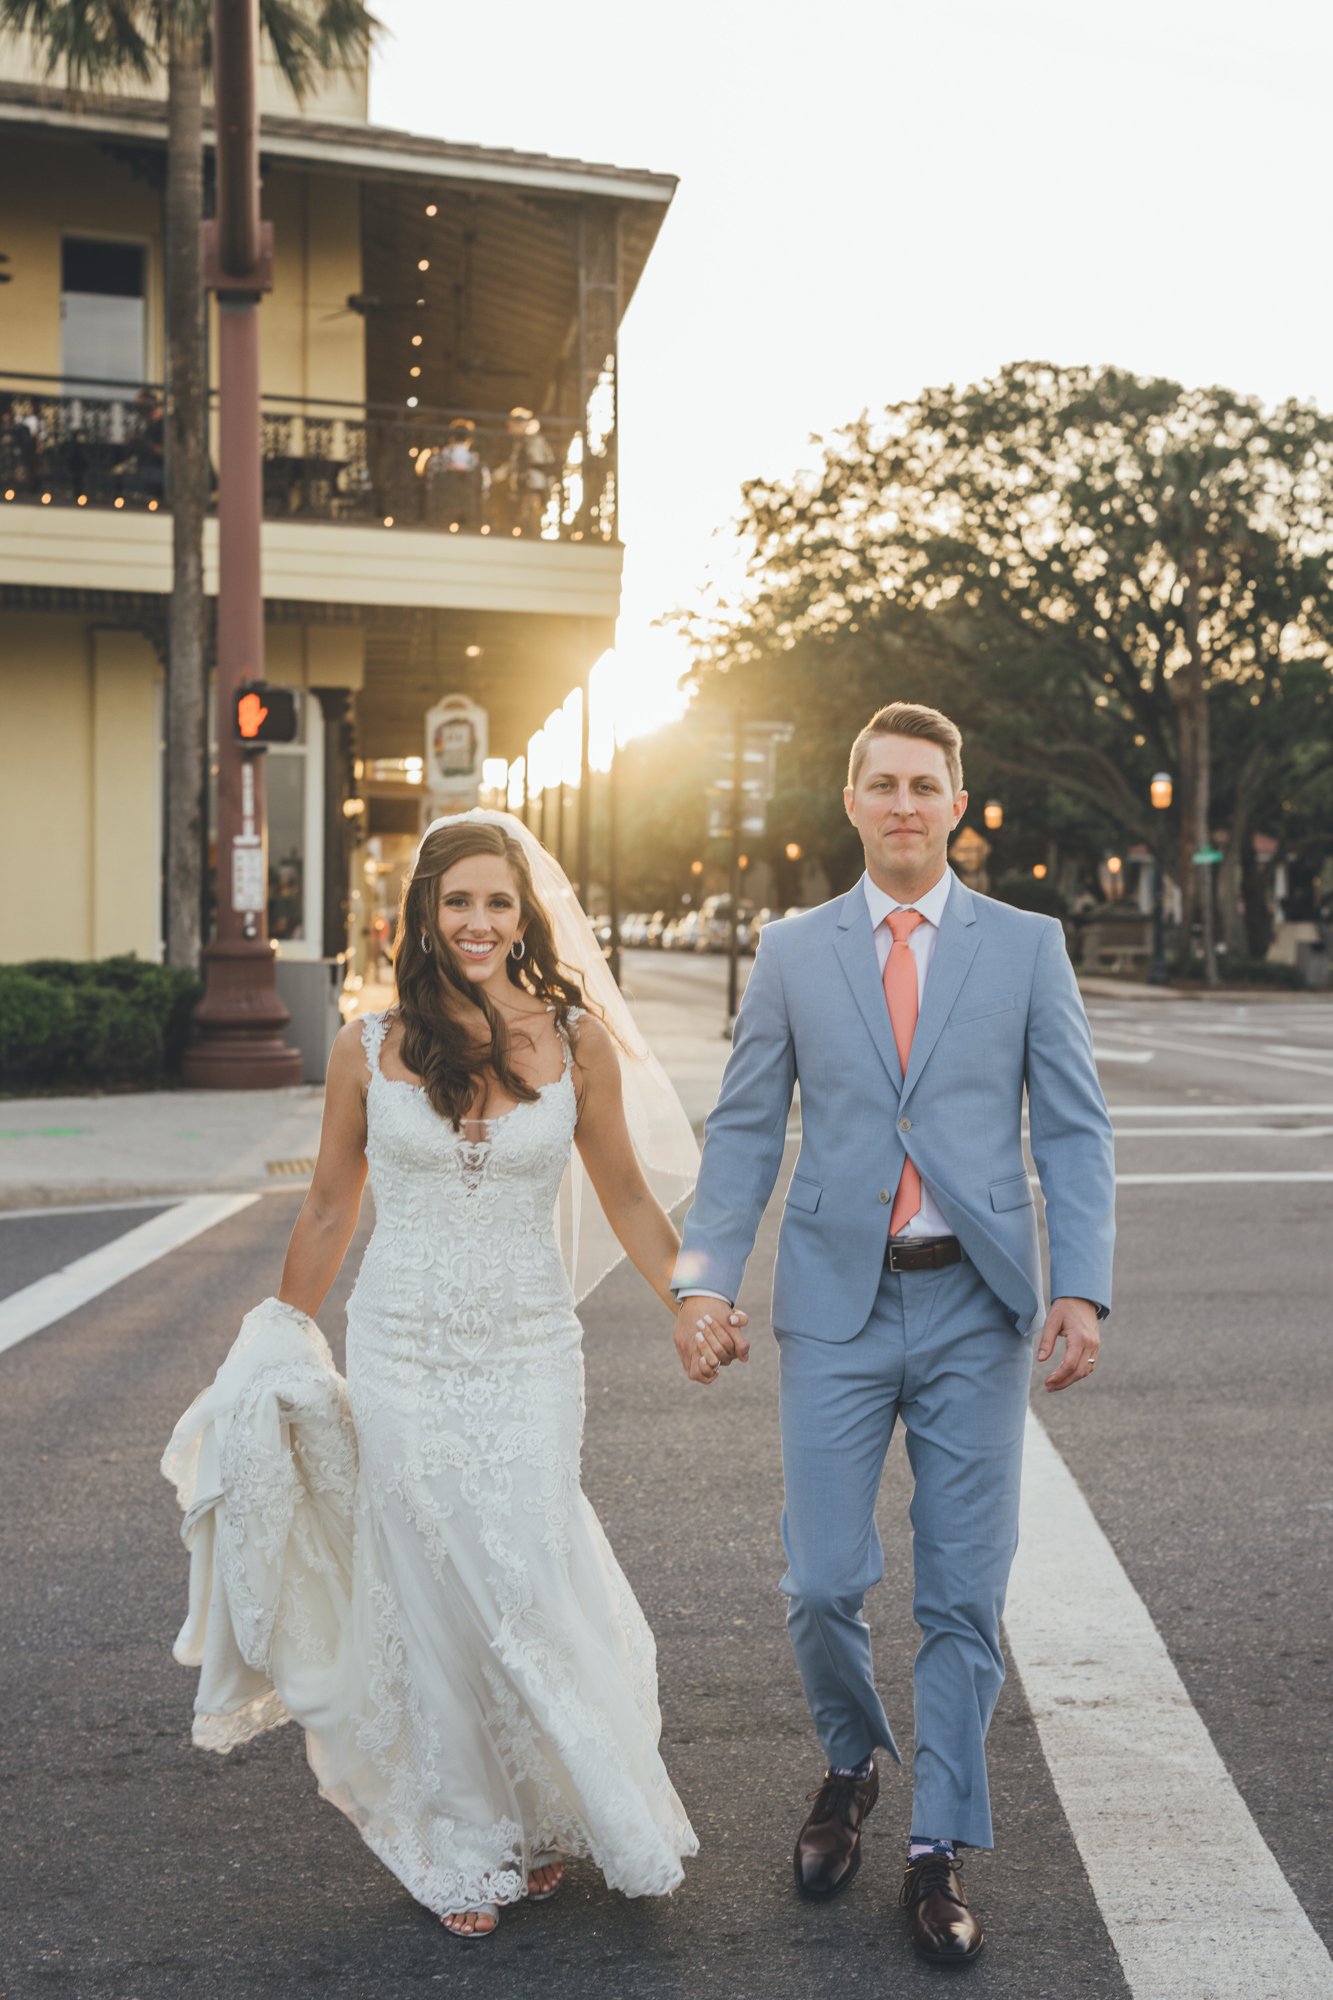 Bow Tie Photo & Video couple's bridal portraits outside of the white room in st. augustine, fl 4.jpg